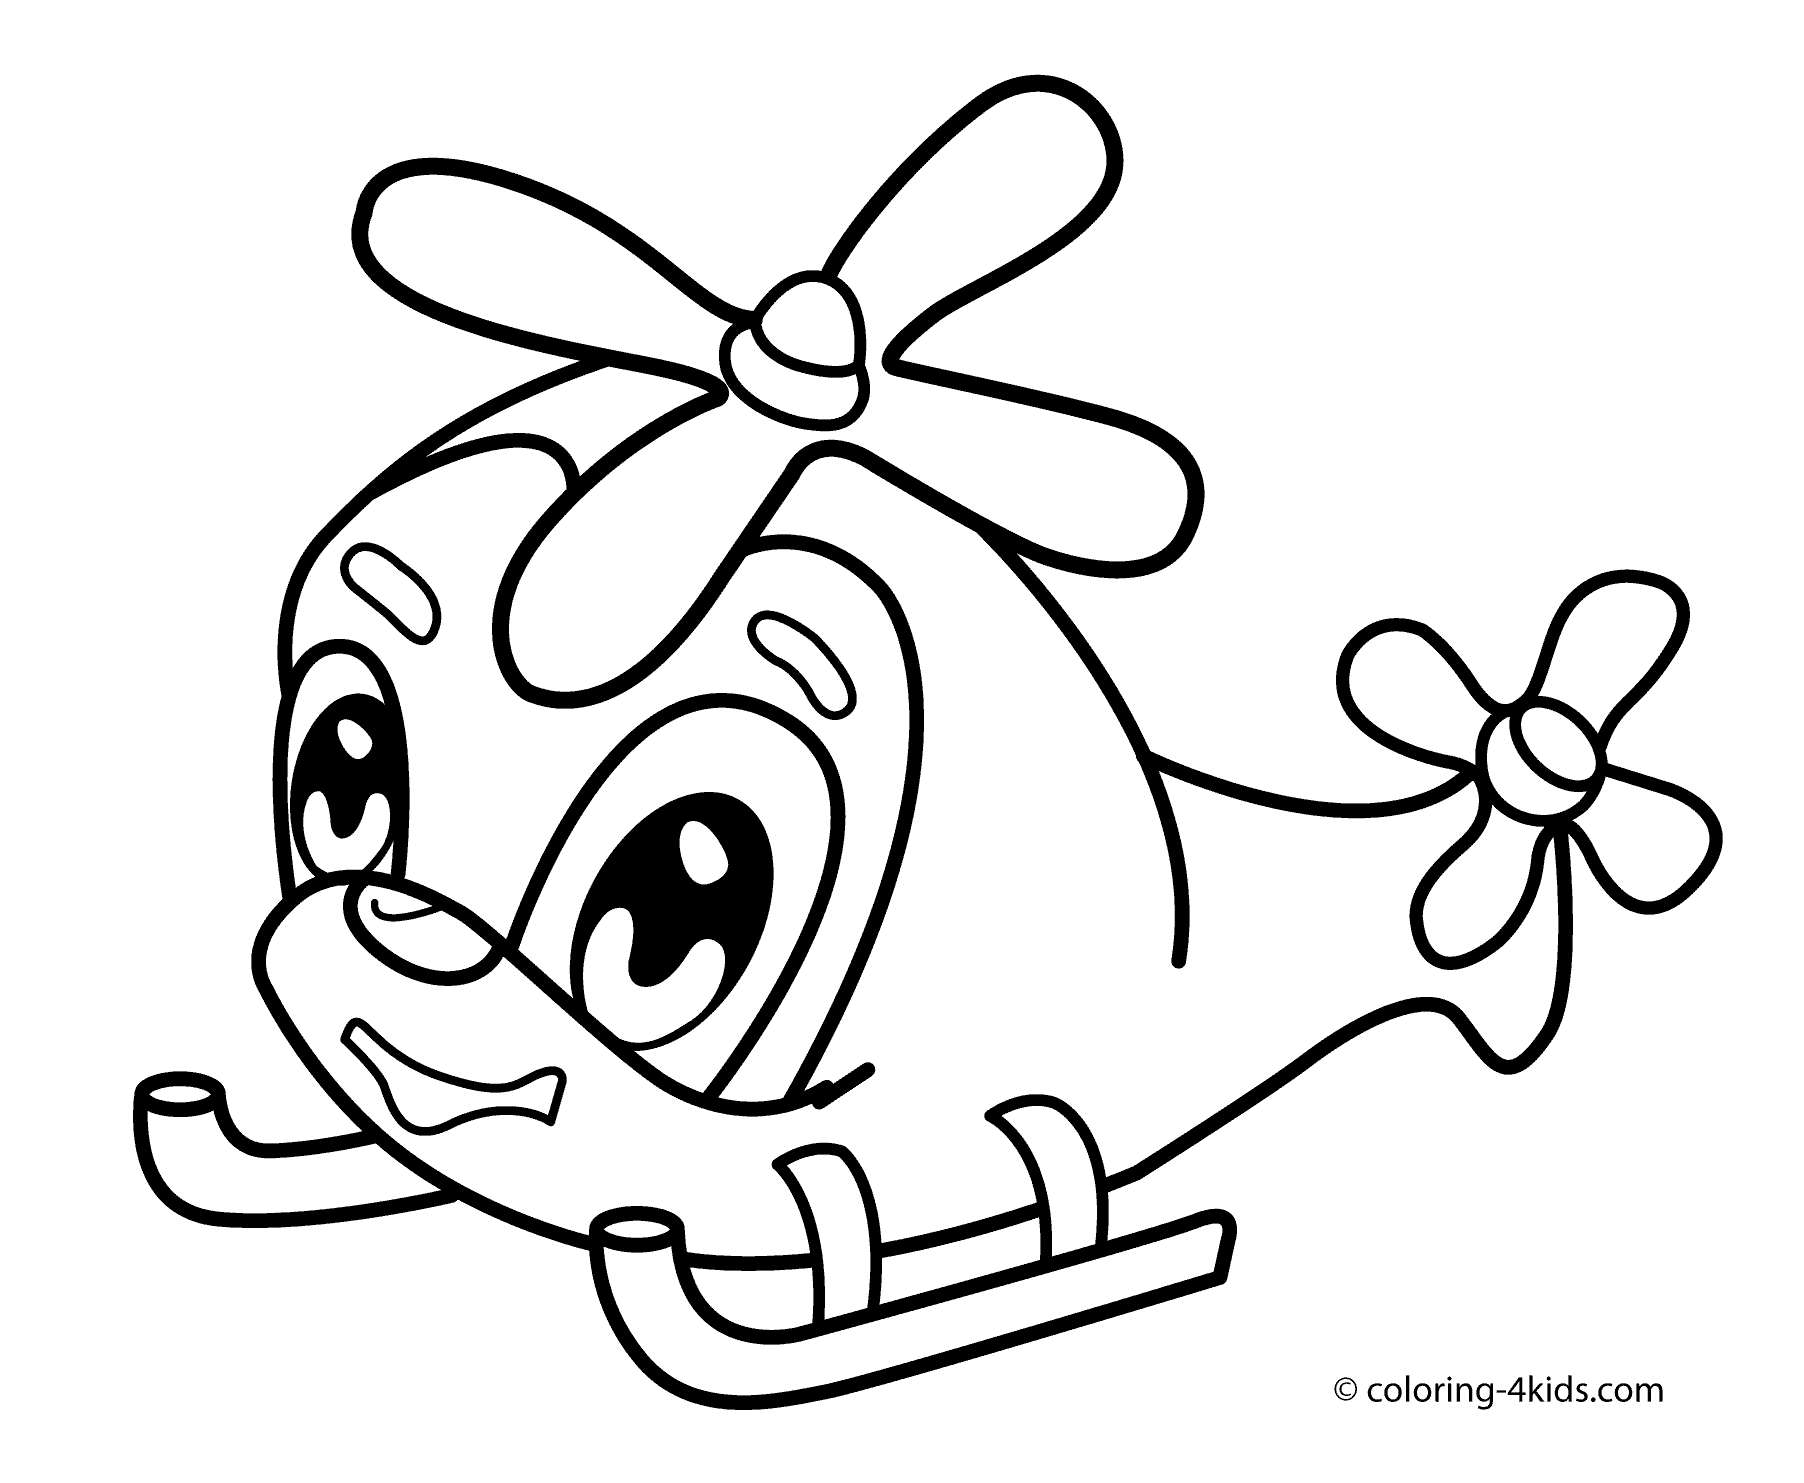 Download Coloring Pages | Crafts and Worksheets for Preschool,Toddler and Kindergarten - Part 2